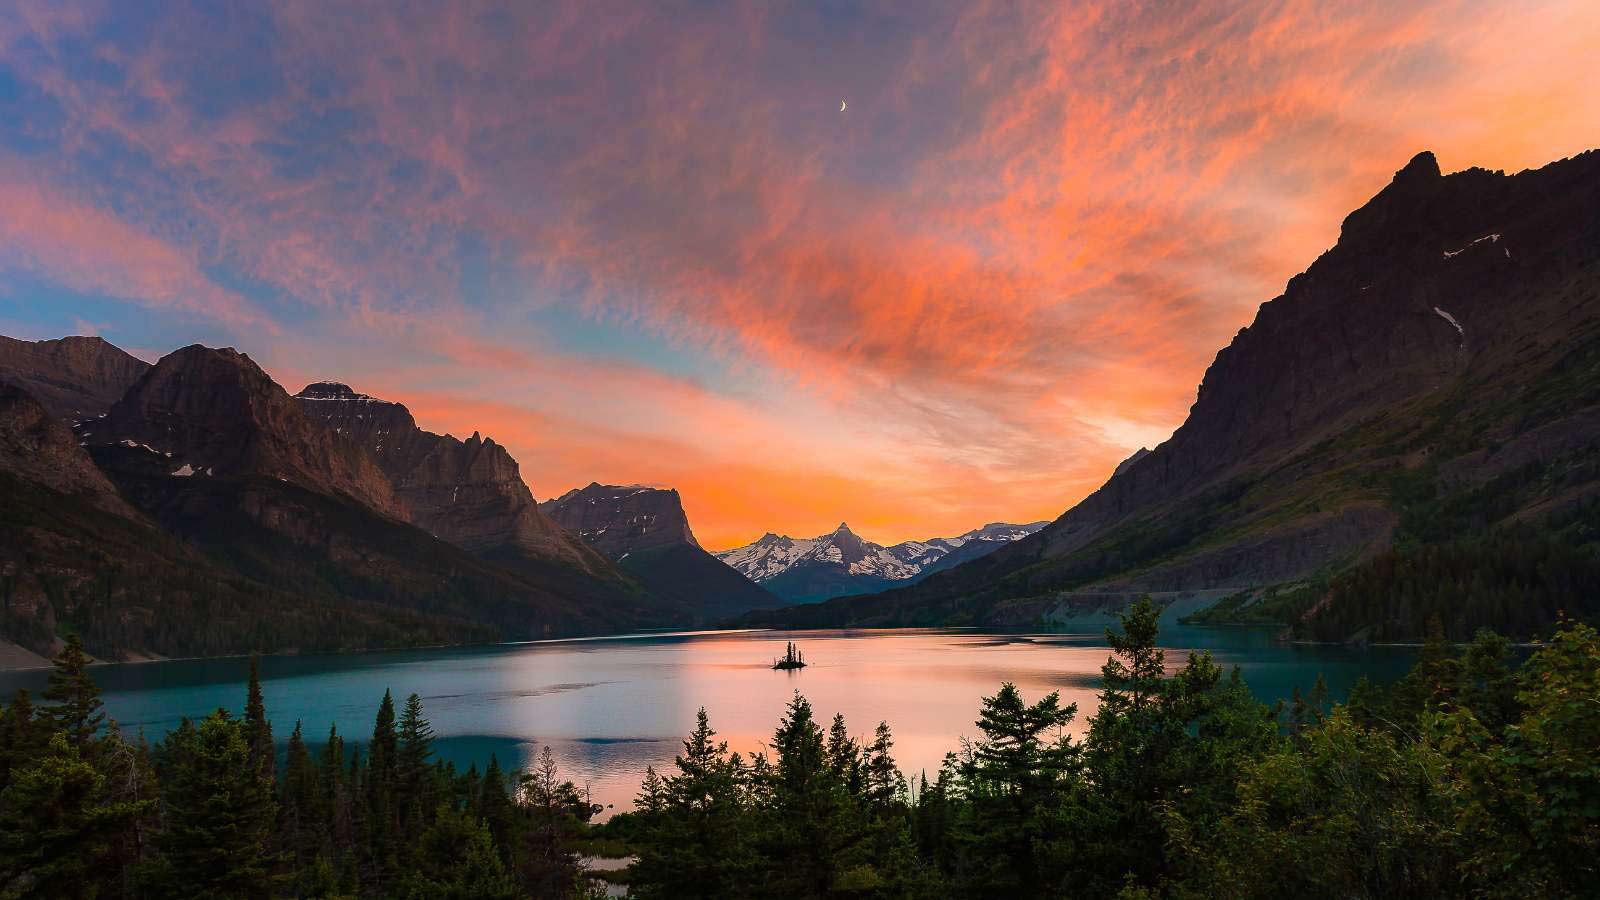 <p>Established in 1910, Glacier National Park covers over one million acres and is currently home to 26 glaciers. However, the park’s glaciers have been shrinking, down from 150 in 1850. In the park’s history, there have only been ten bear attacks, with two occurring on the same night, miles apart. Both victims were 19-year-old females, and this occurred 54 years ago on August 24th.</p>